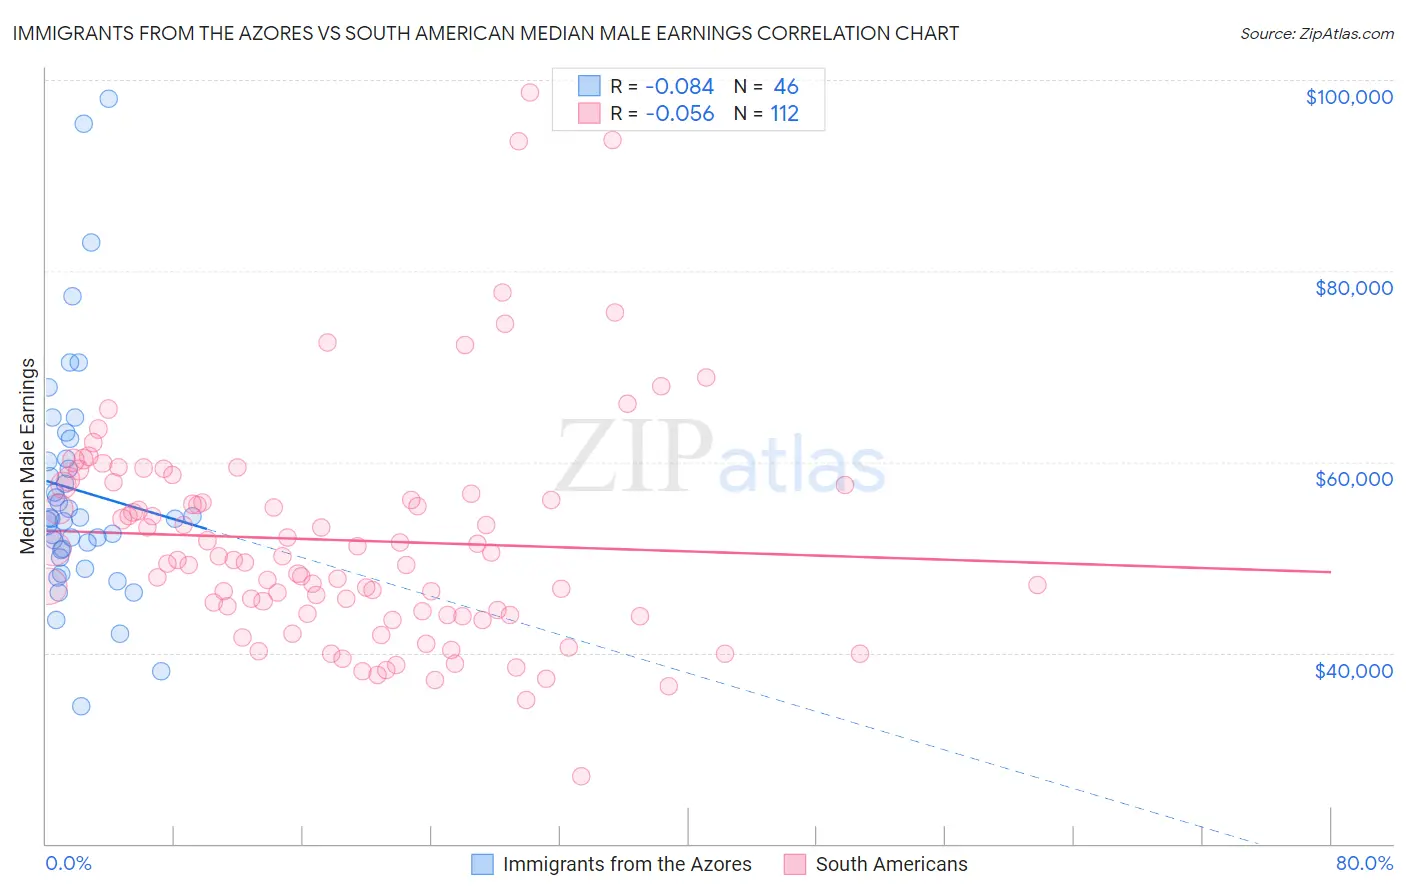 Immigrants from the Azores vs South American Median Male Earnings